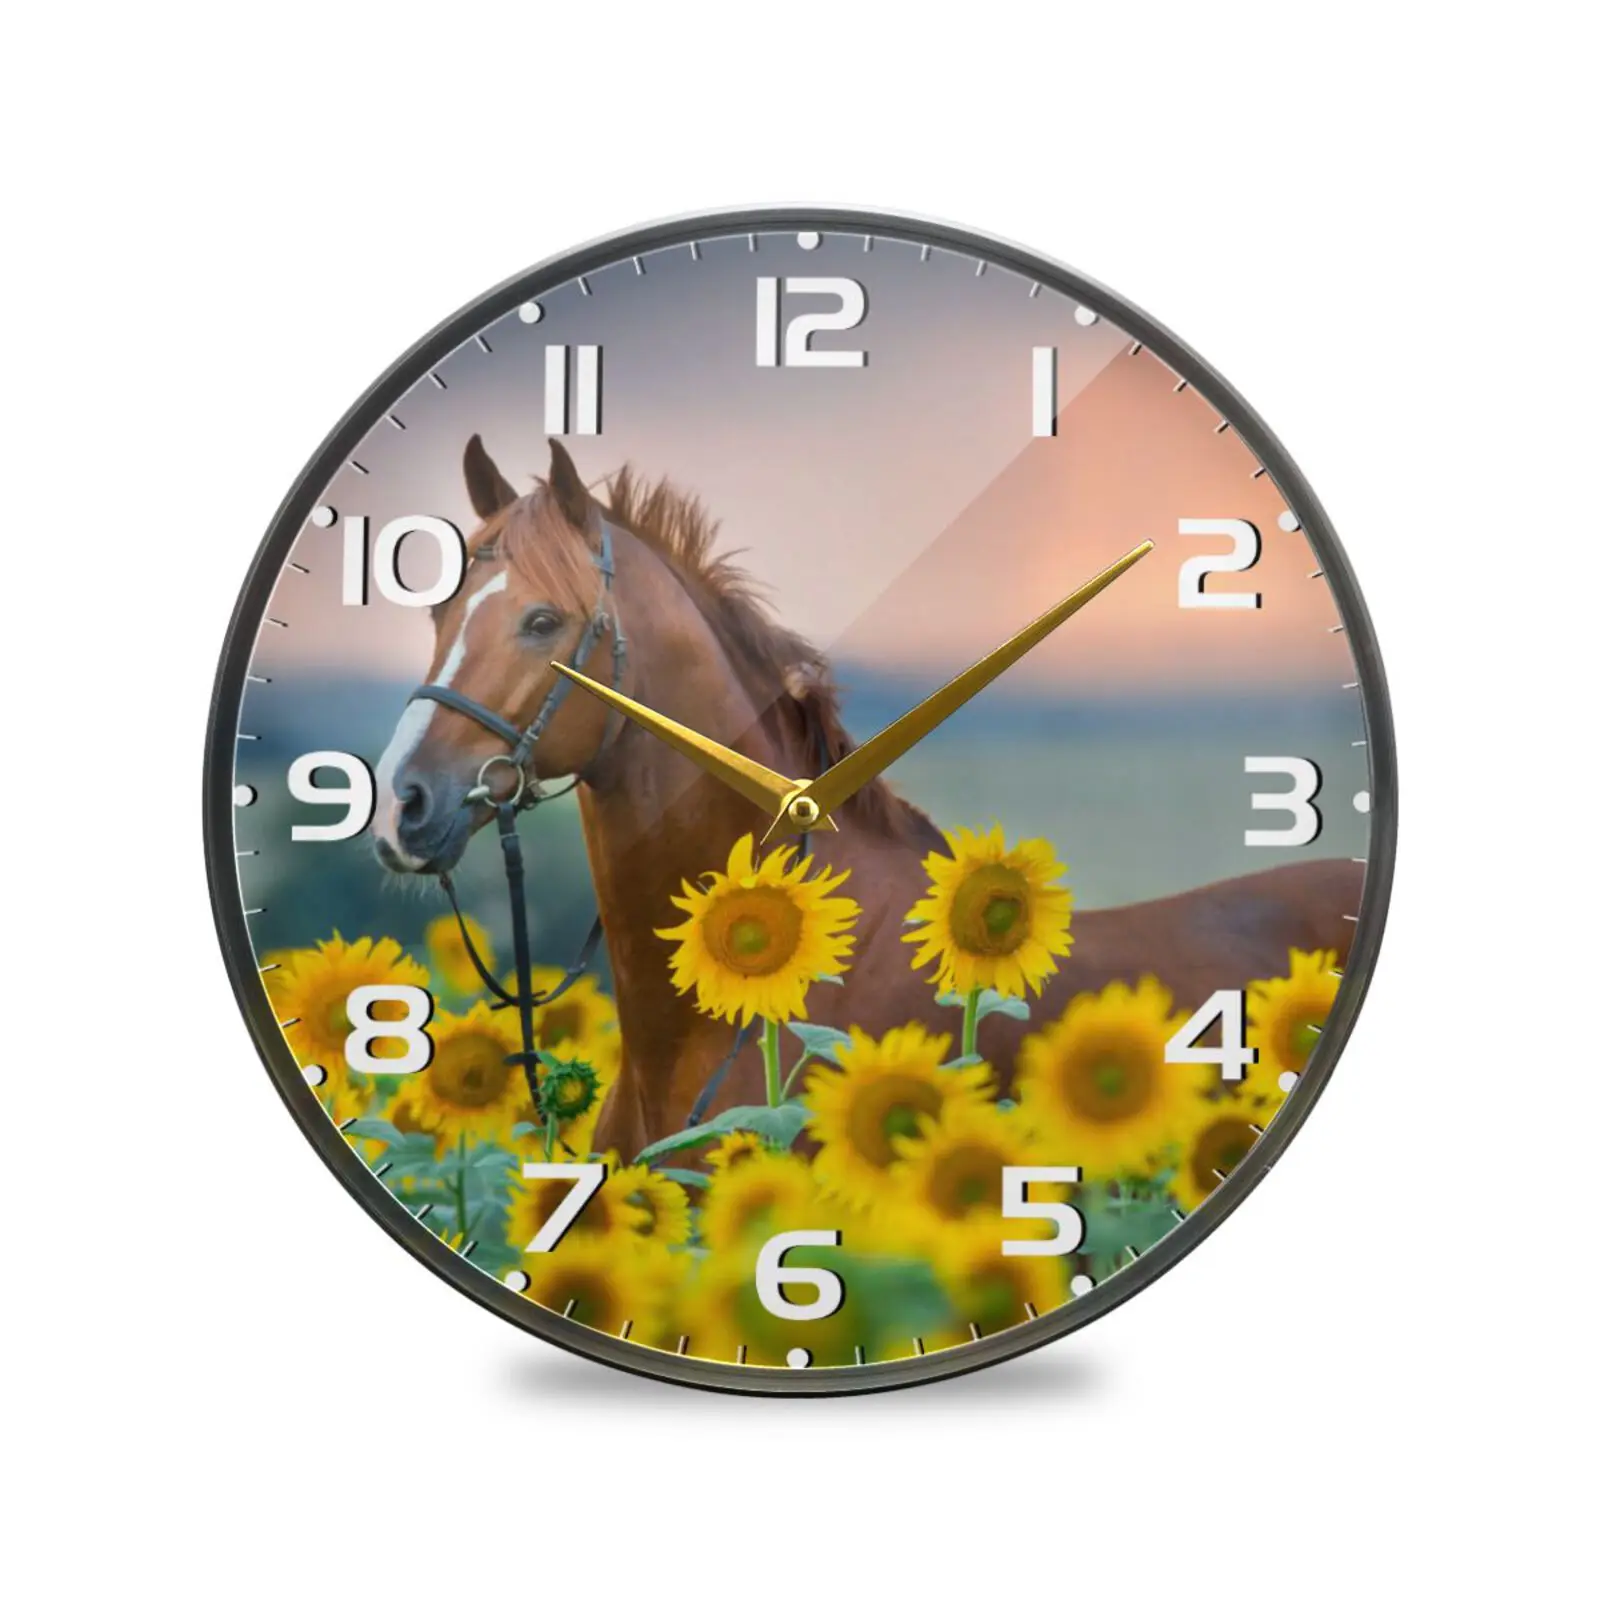 Acrylic Round Wall Clock Sunflowers Horse Print Silent Wall Watch Battery Operated Non-Ticking Quiet Desk Clock For Home Decor